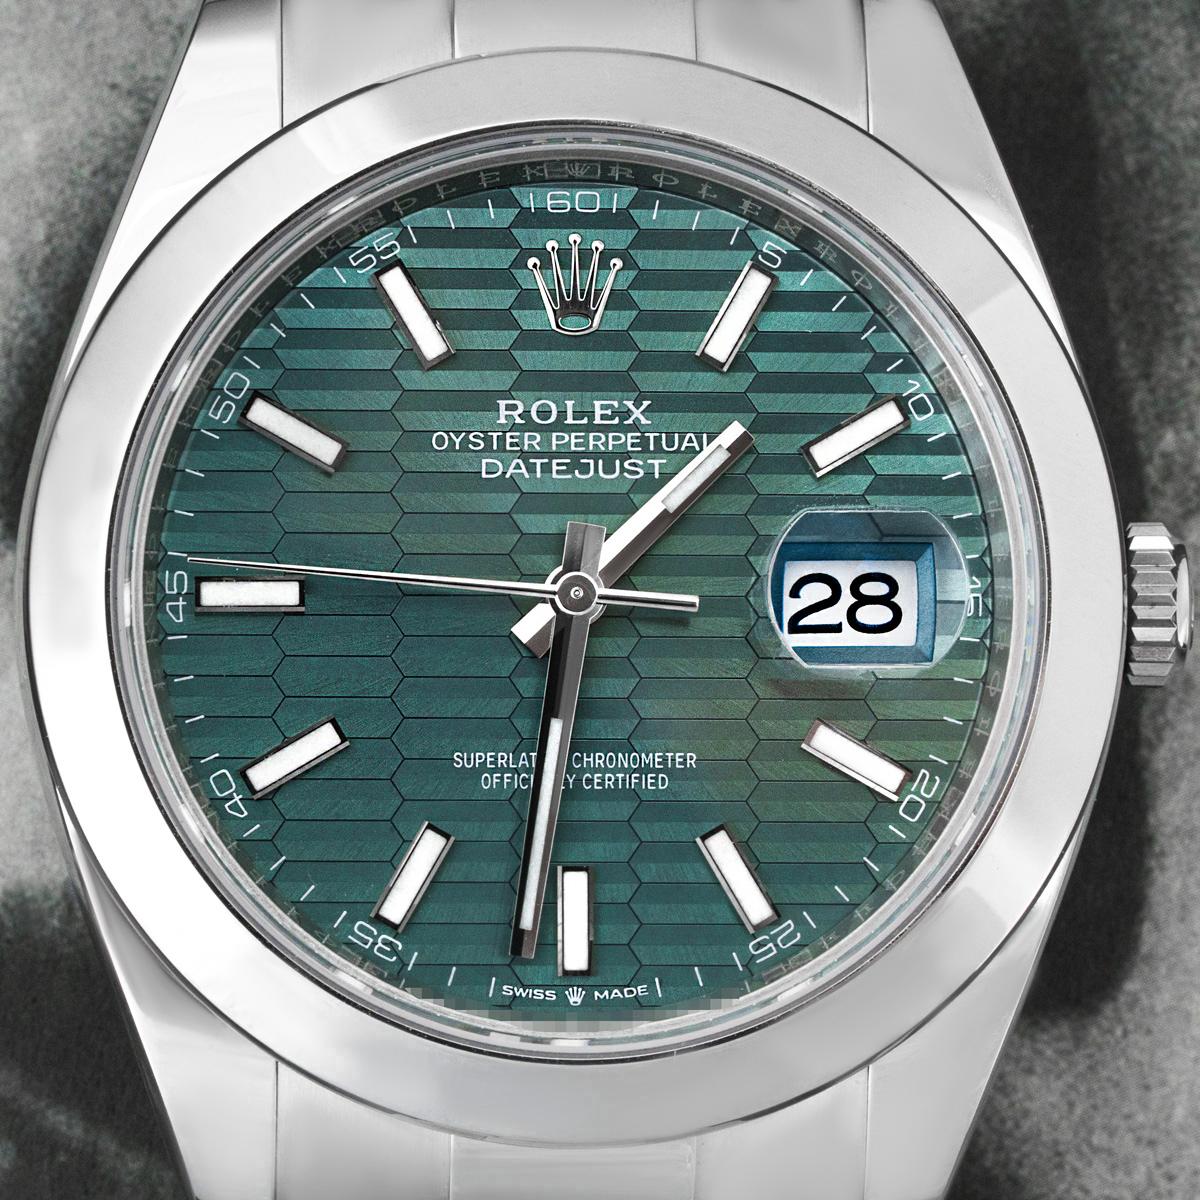 An unworn 41mm stainless steel Datejust by Rolex. Featuring a distinctive mint green fluted motif dial with applied hour markers and a smooth fixed steel bezel. Fitted with a sapphire glass, a self-winding automatic movement and an Oyster bracelet